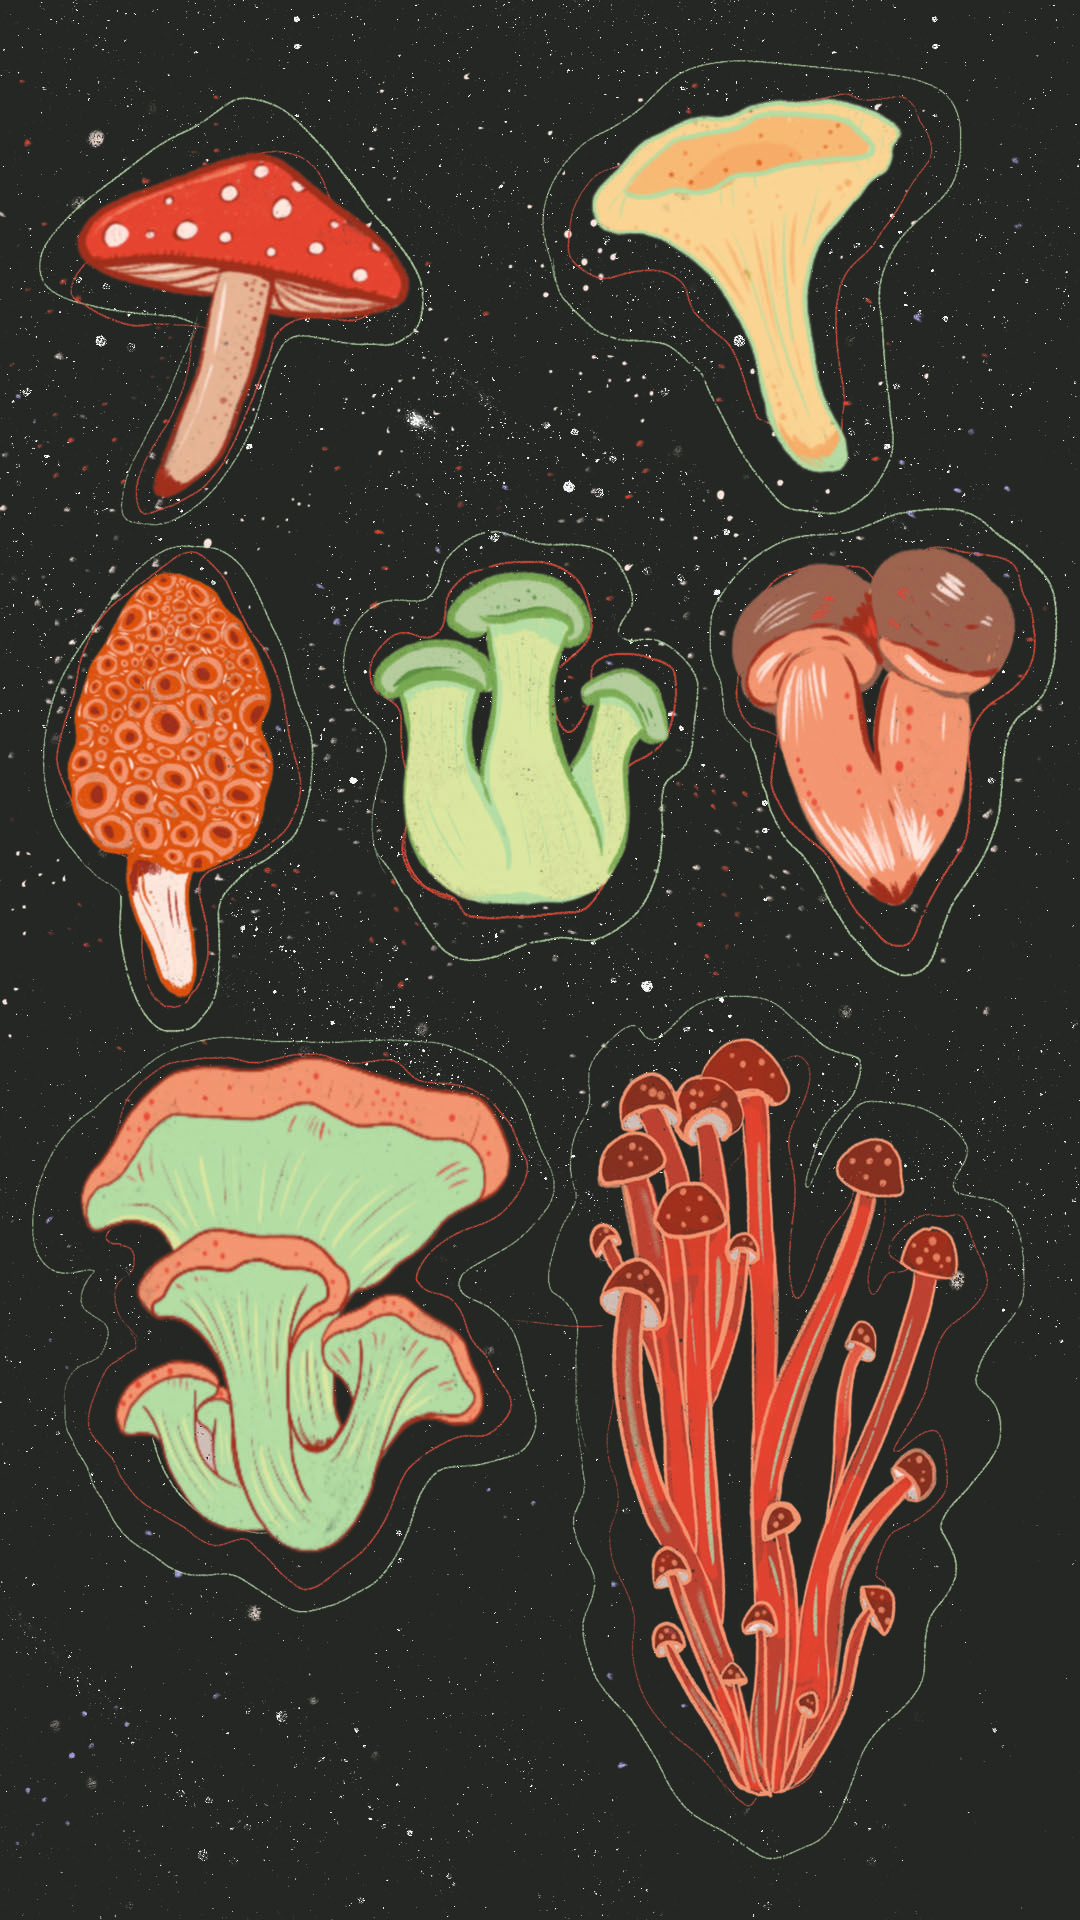 Phone Wall Paper Download Mushroom Forager. Hippie Wallpaper, Mushroom Wallpaper, Art Collage Wall